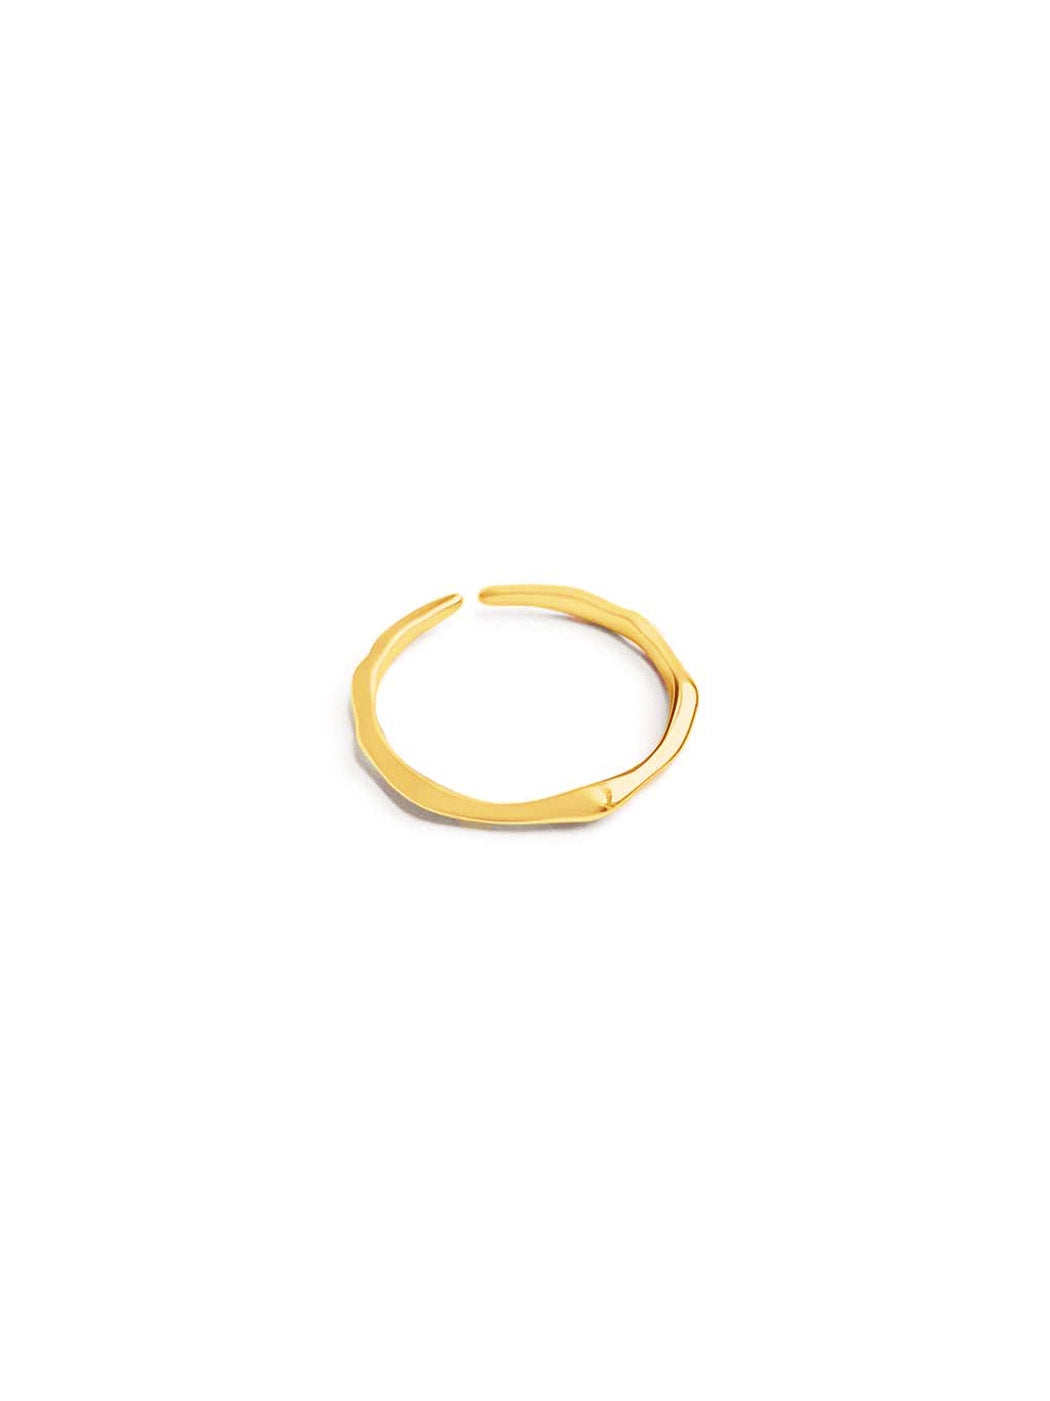 hammered gold stacker ring